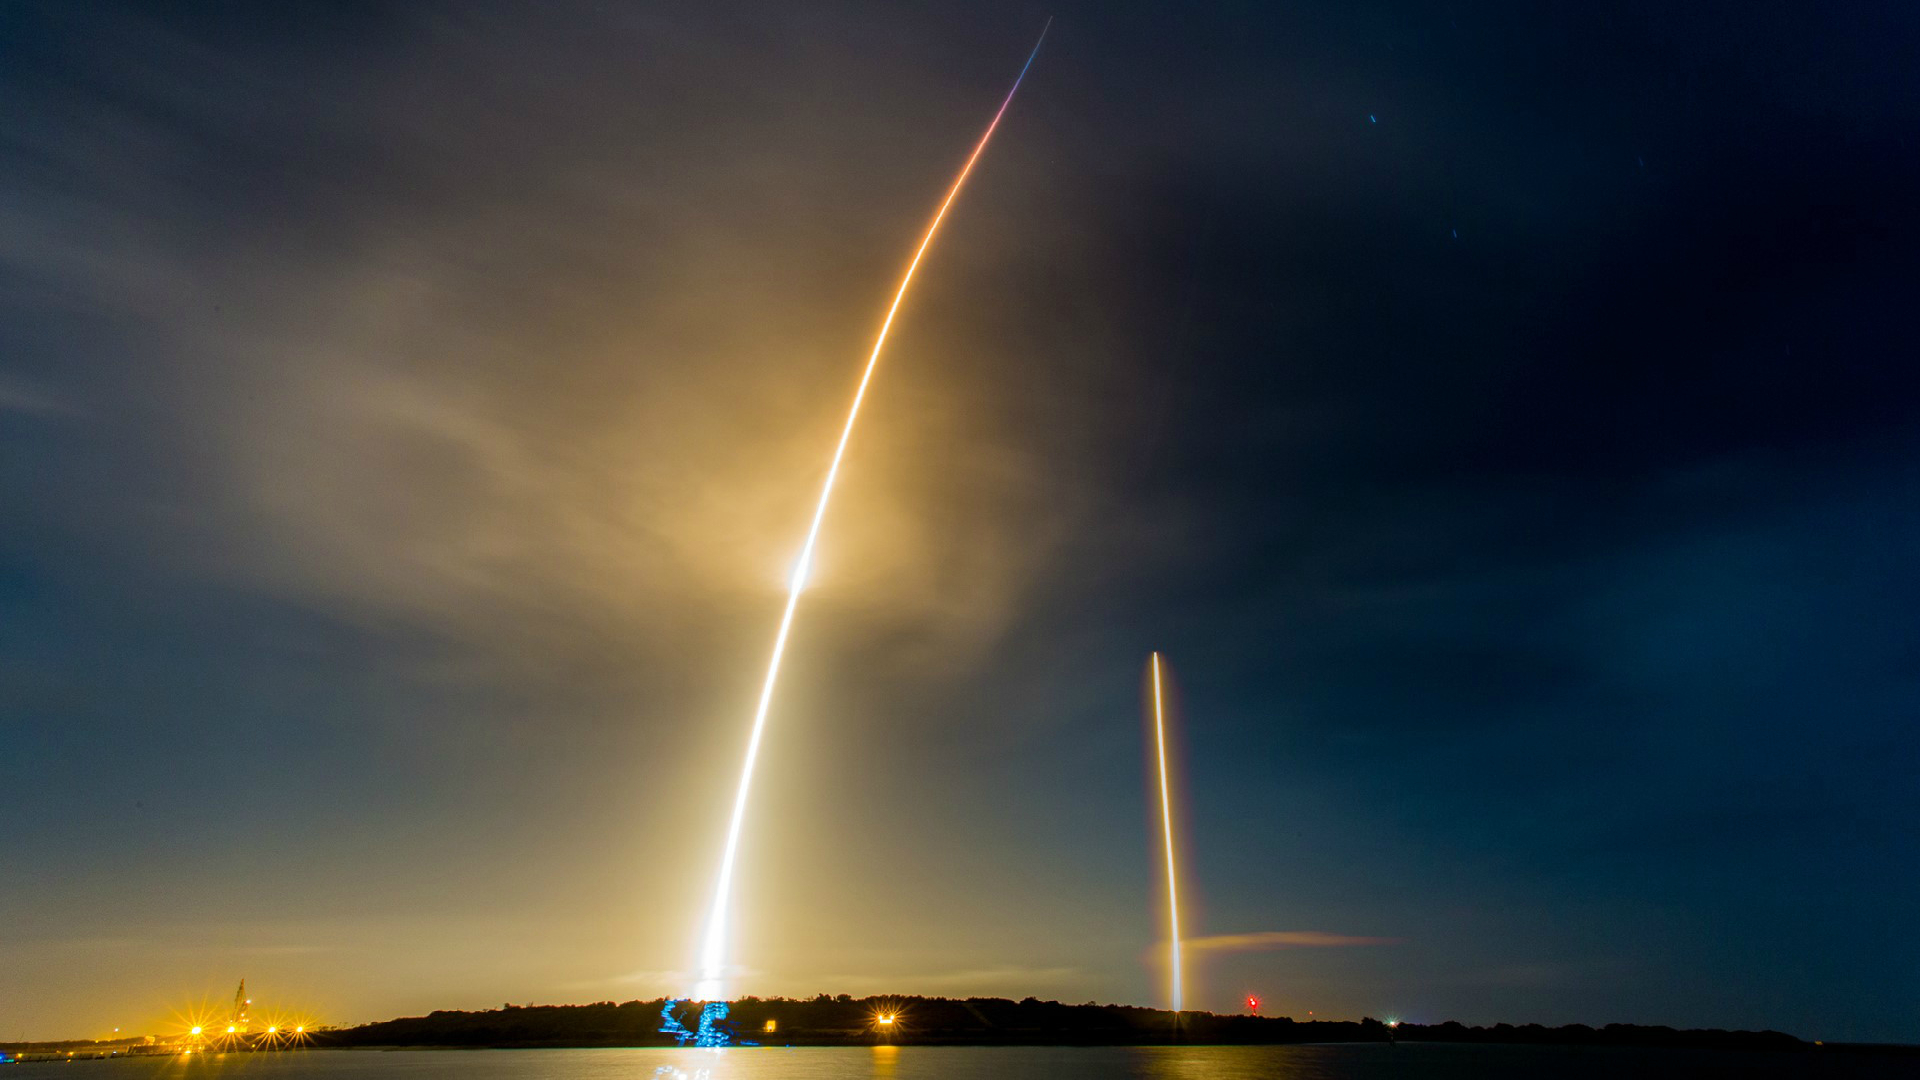 1920x1080 SpaceX Wallpapers Top Free SpaceX Backgrounds